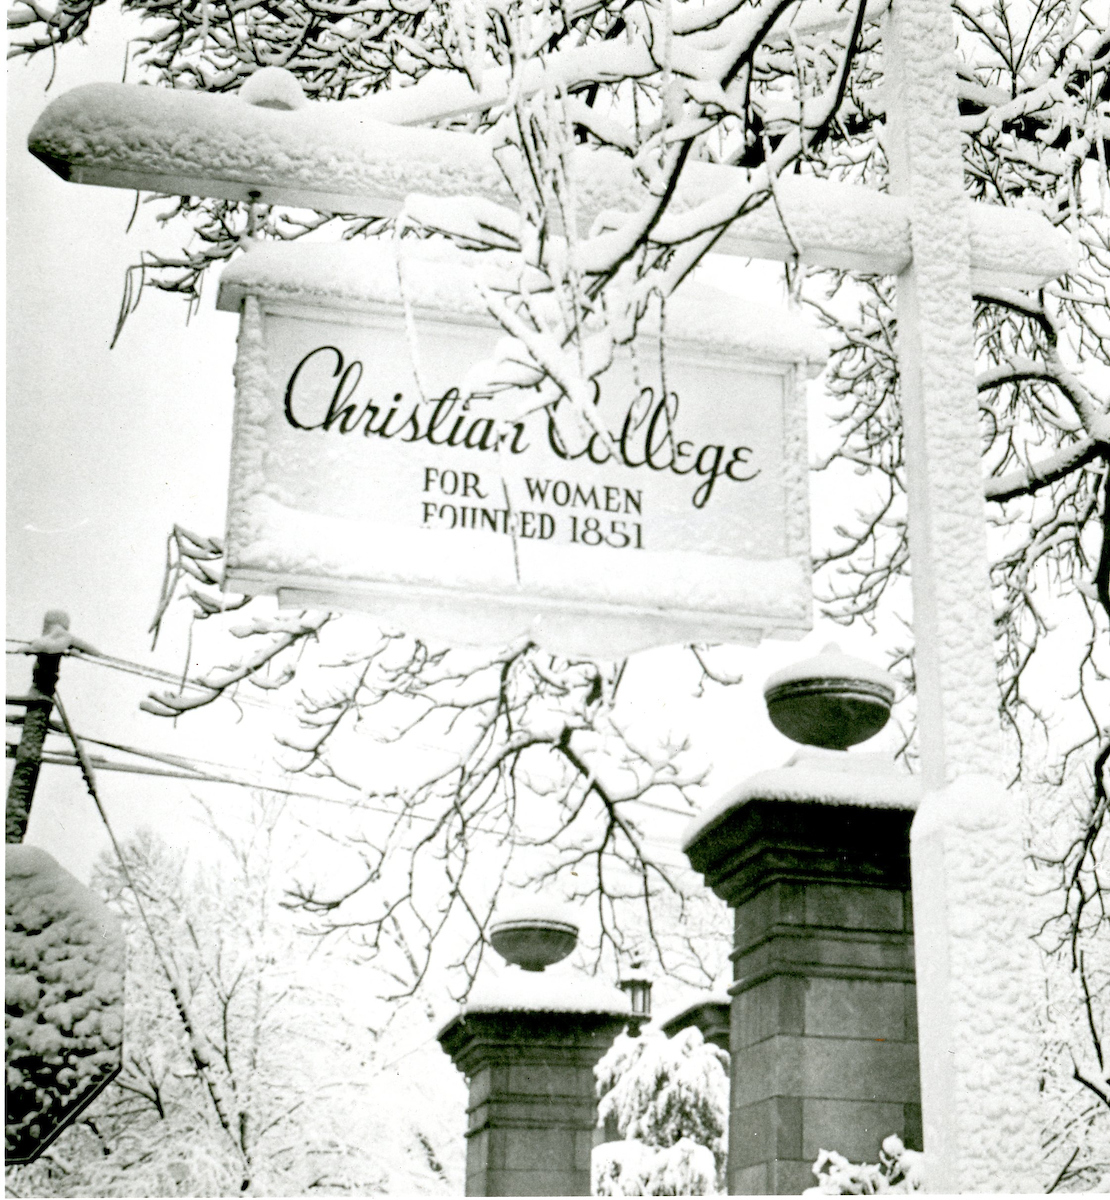 Sign hanging on main campus that reads "Christian College For Women Founded 1851".